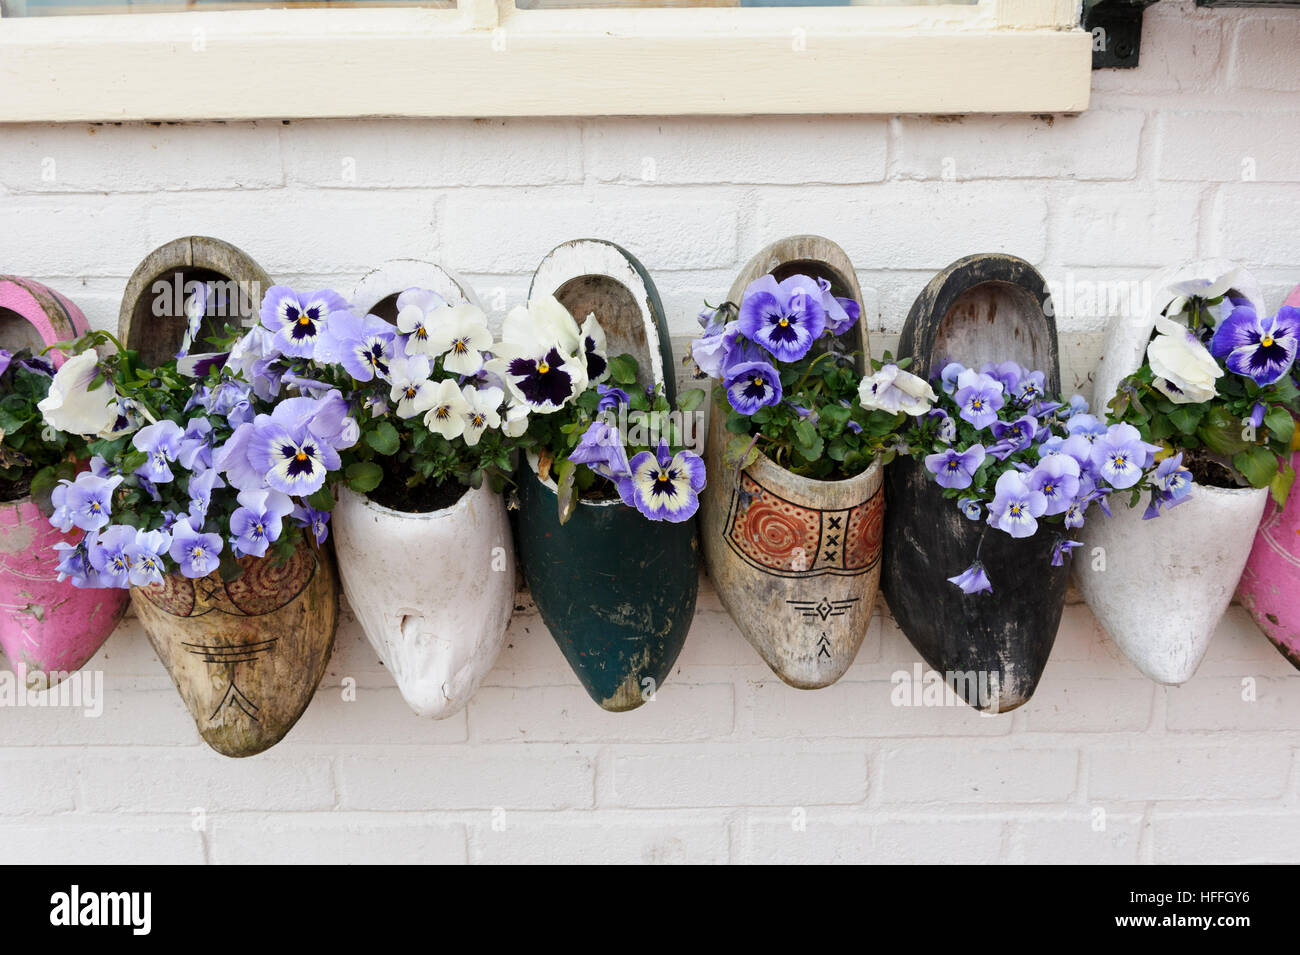 Old clogs decorated with fresh flowers on display on the exterior wall of a shop in Holland, Netherlands. Stock Photo